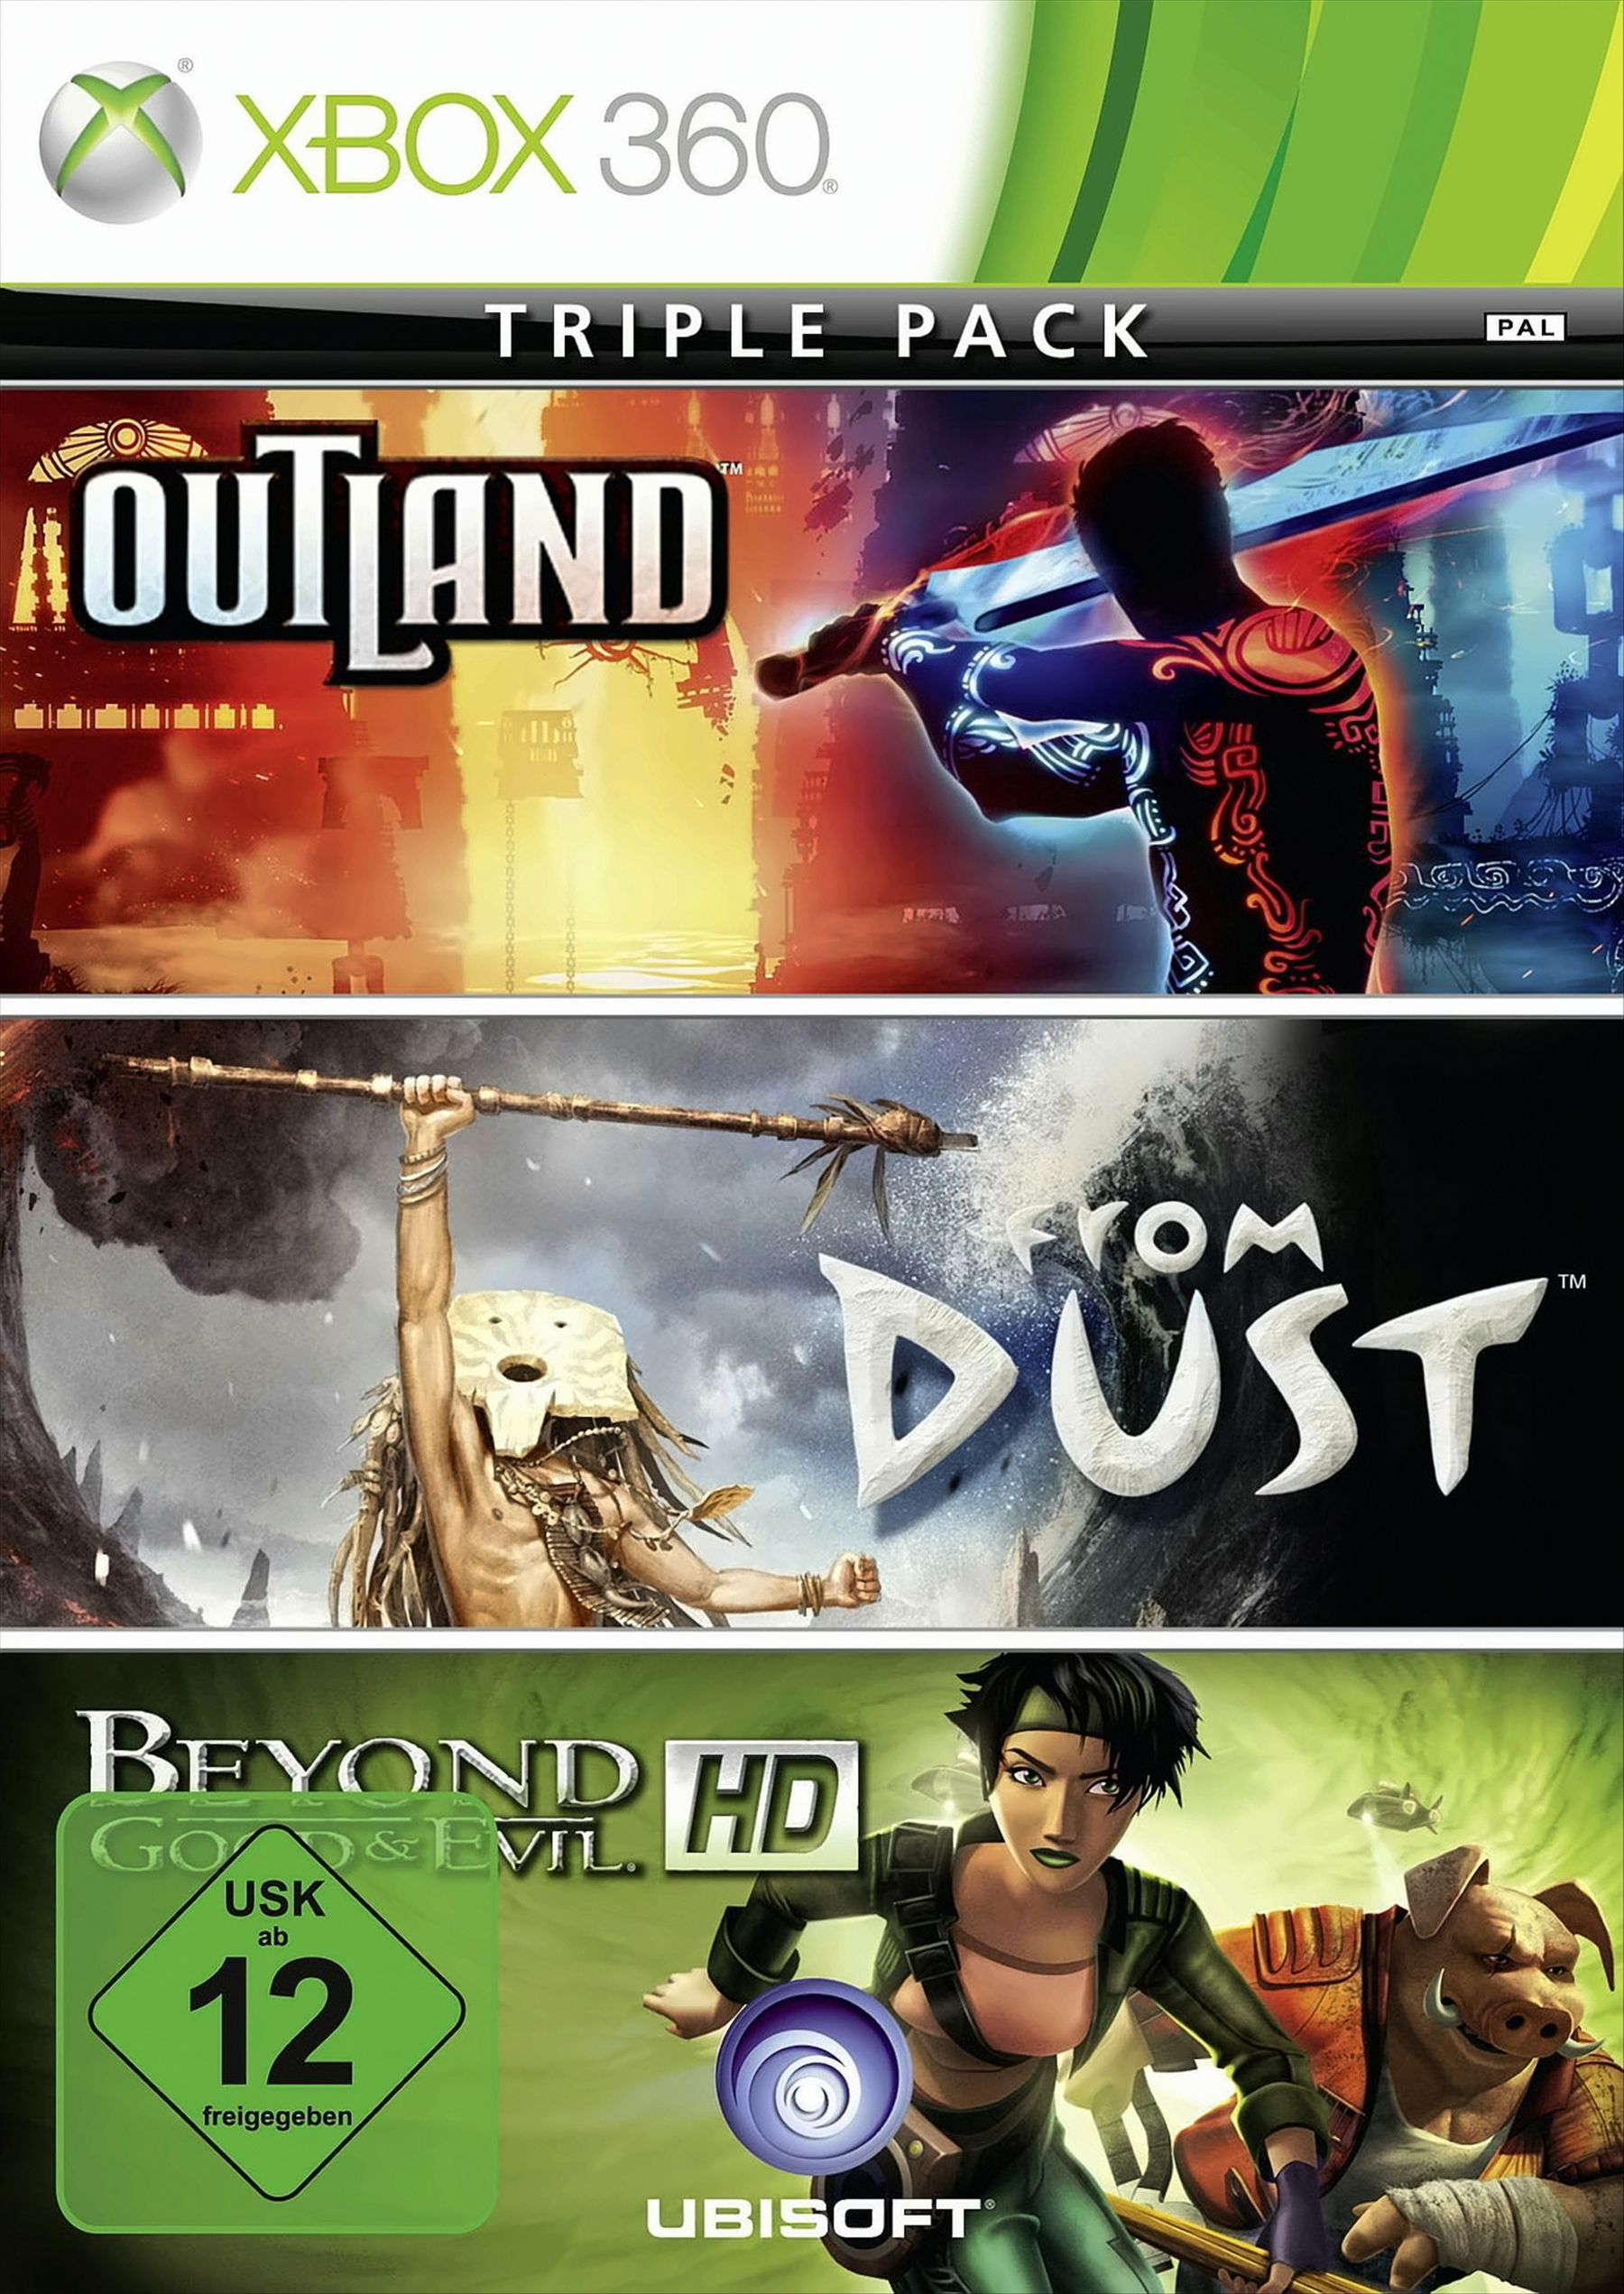 Xbox 360 360] From Pack: Beyond - [Xbox Good Outland HD / Evil & Triple Dust 